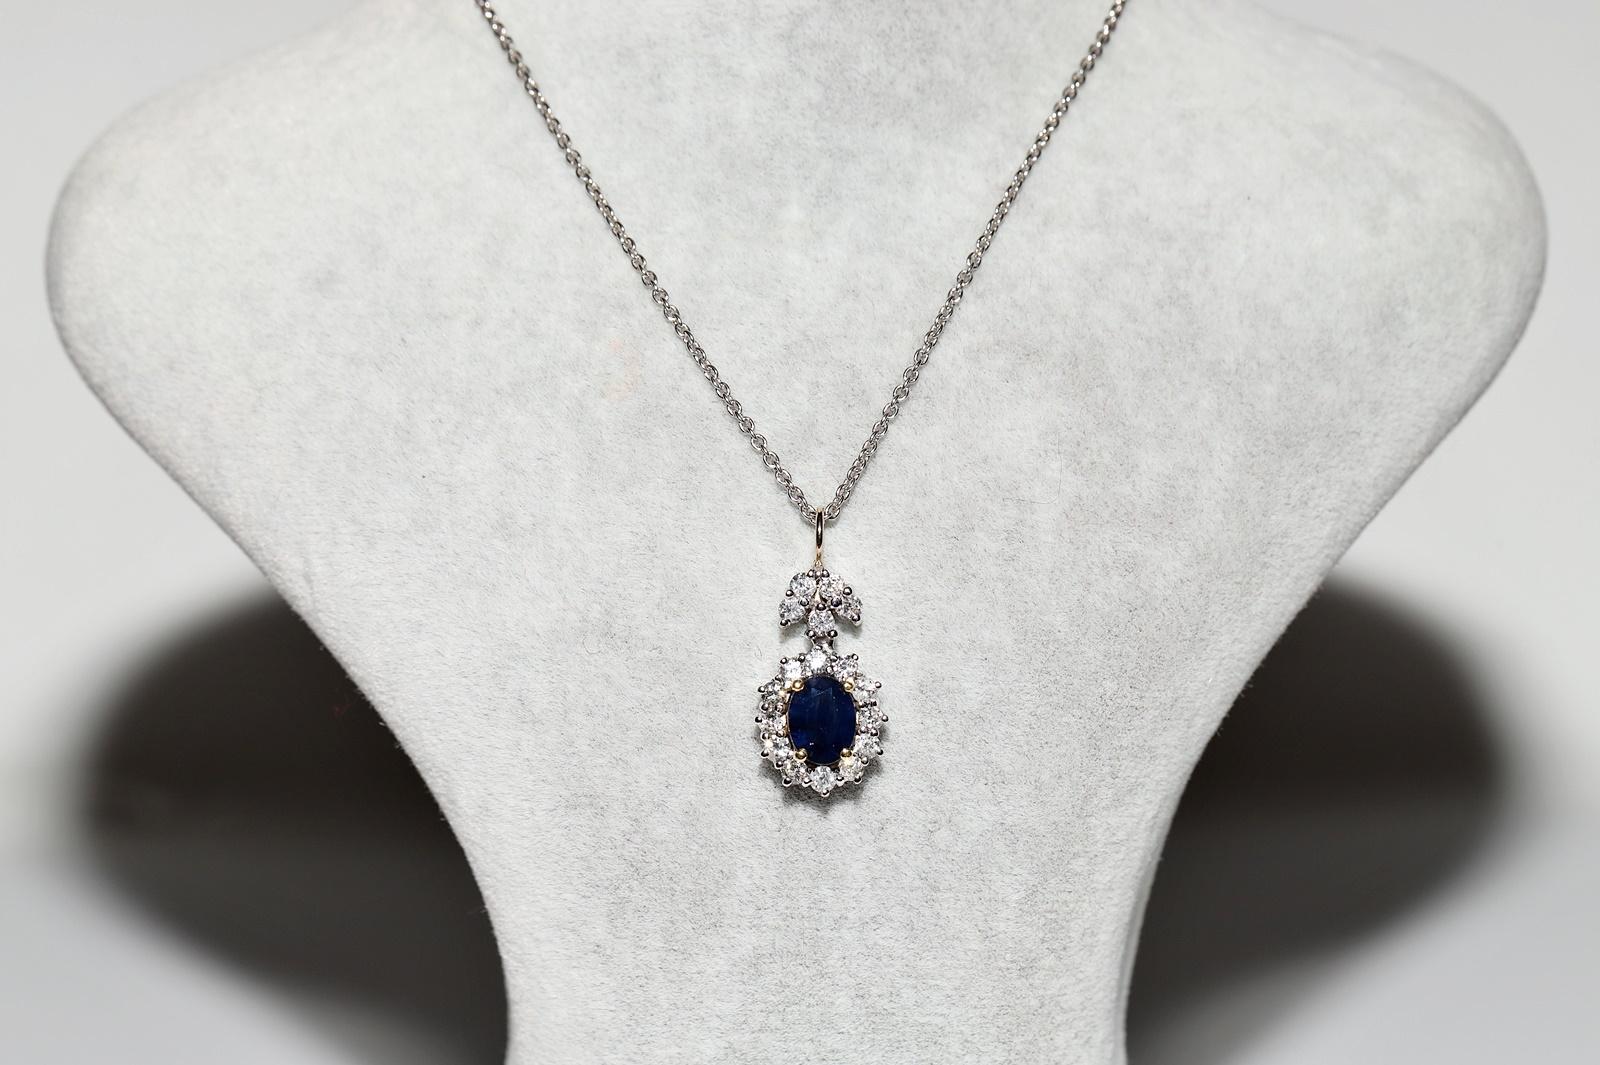 In very good condition.
Total weight is 8.4 grams.
Totally is diamond 1 ct.
The diamond is has H color and vs-s1 clarity.
Totally is sapphire 1.10 ct.
Total lenght is chain 45 cm.
Please contact for any questions.